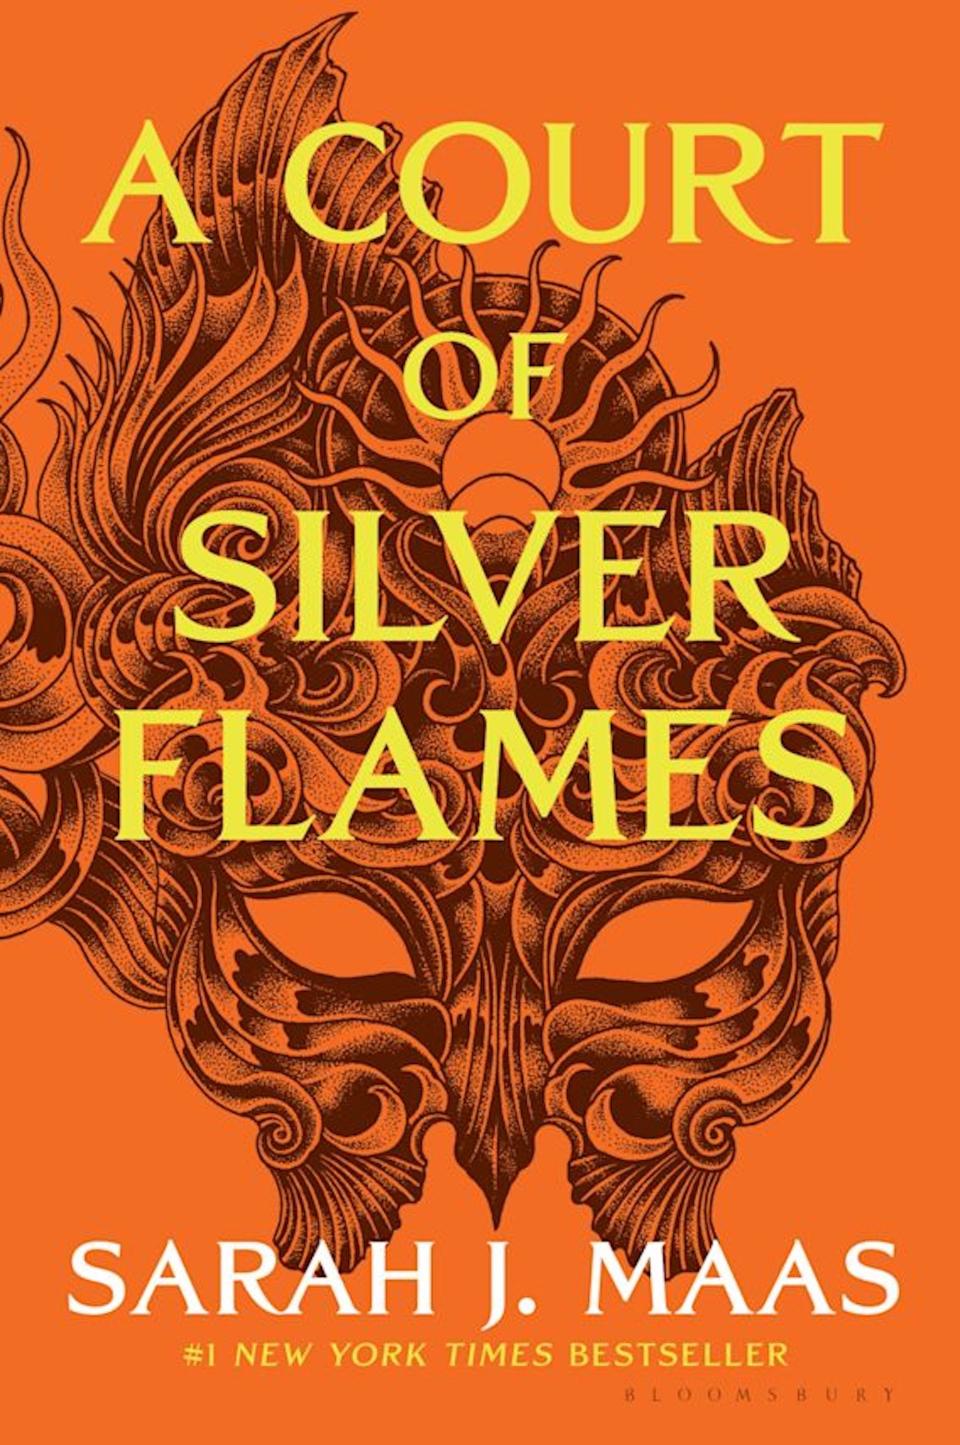 "A Court of Silver Flames" by Sarah J. Maas.